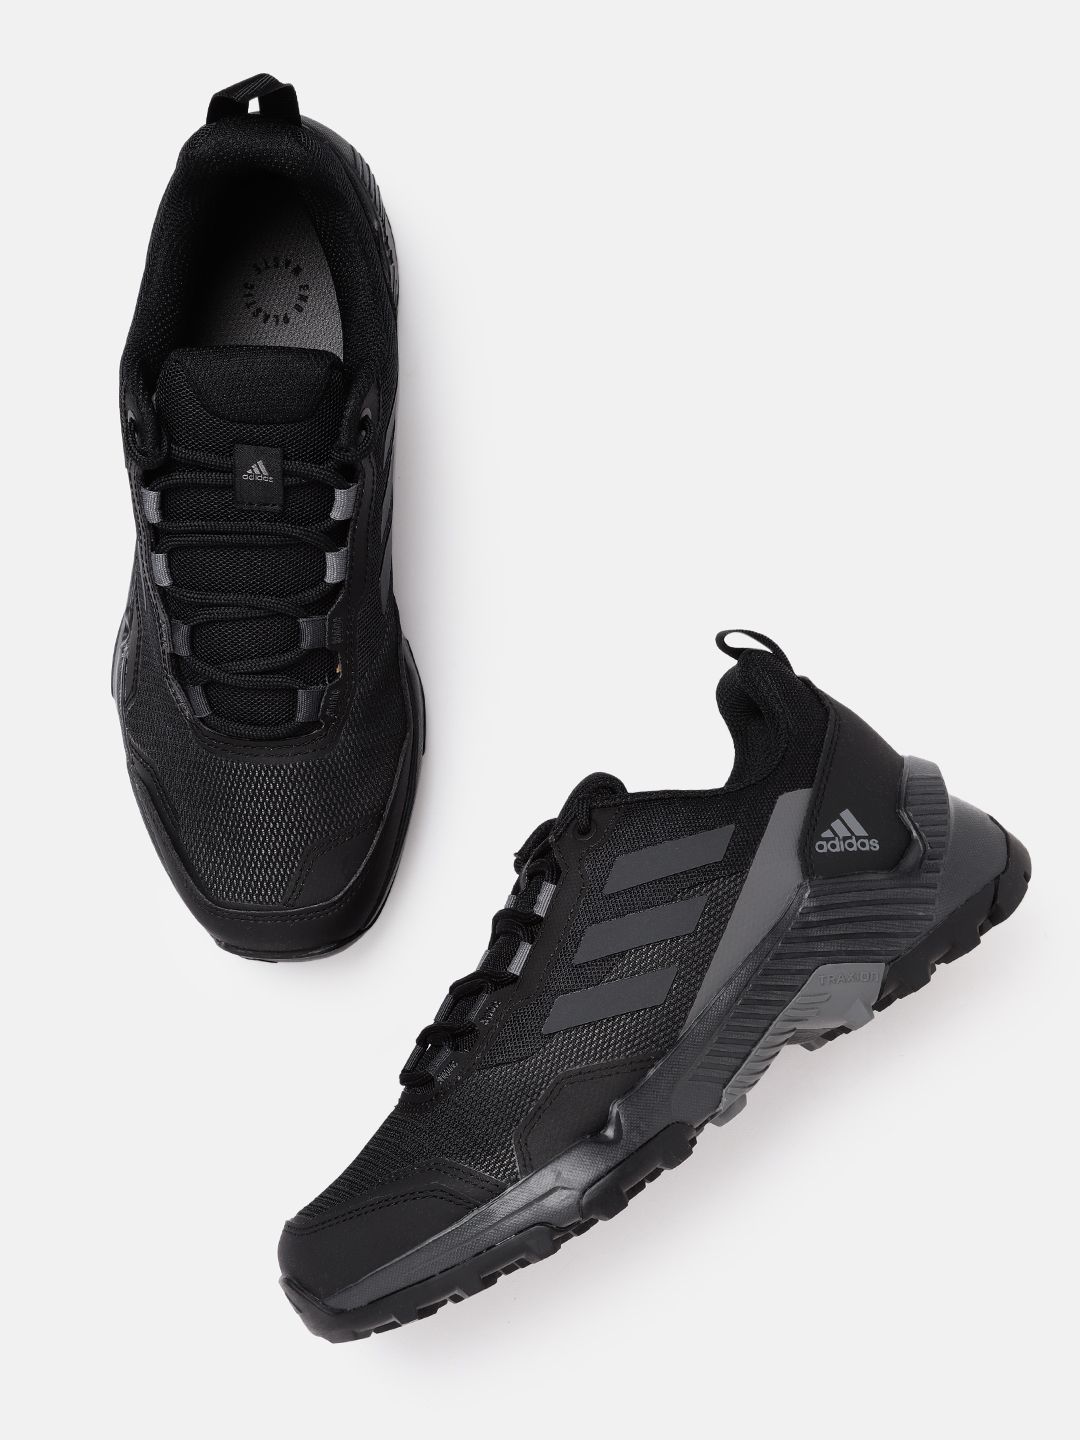 ADIDAS Women Black Woven Design Eastrail 2 Hiking Shoes Price in India